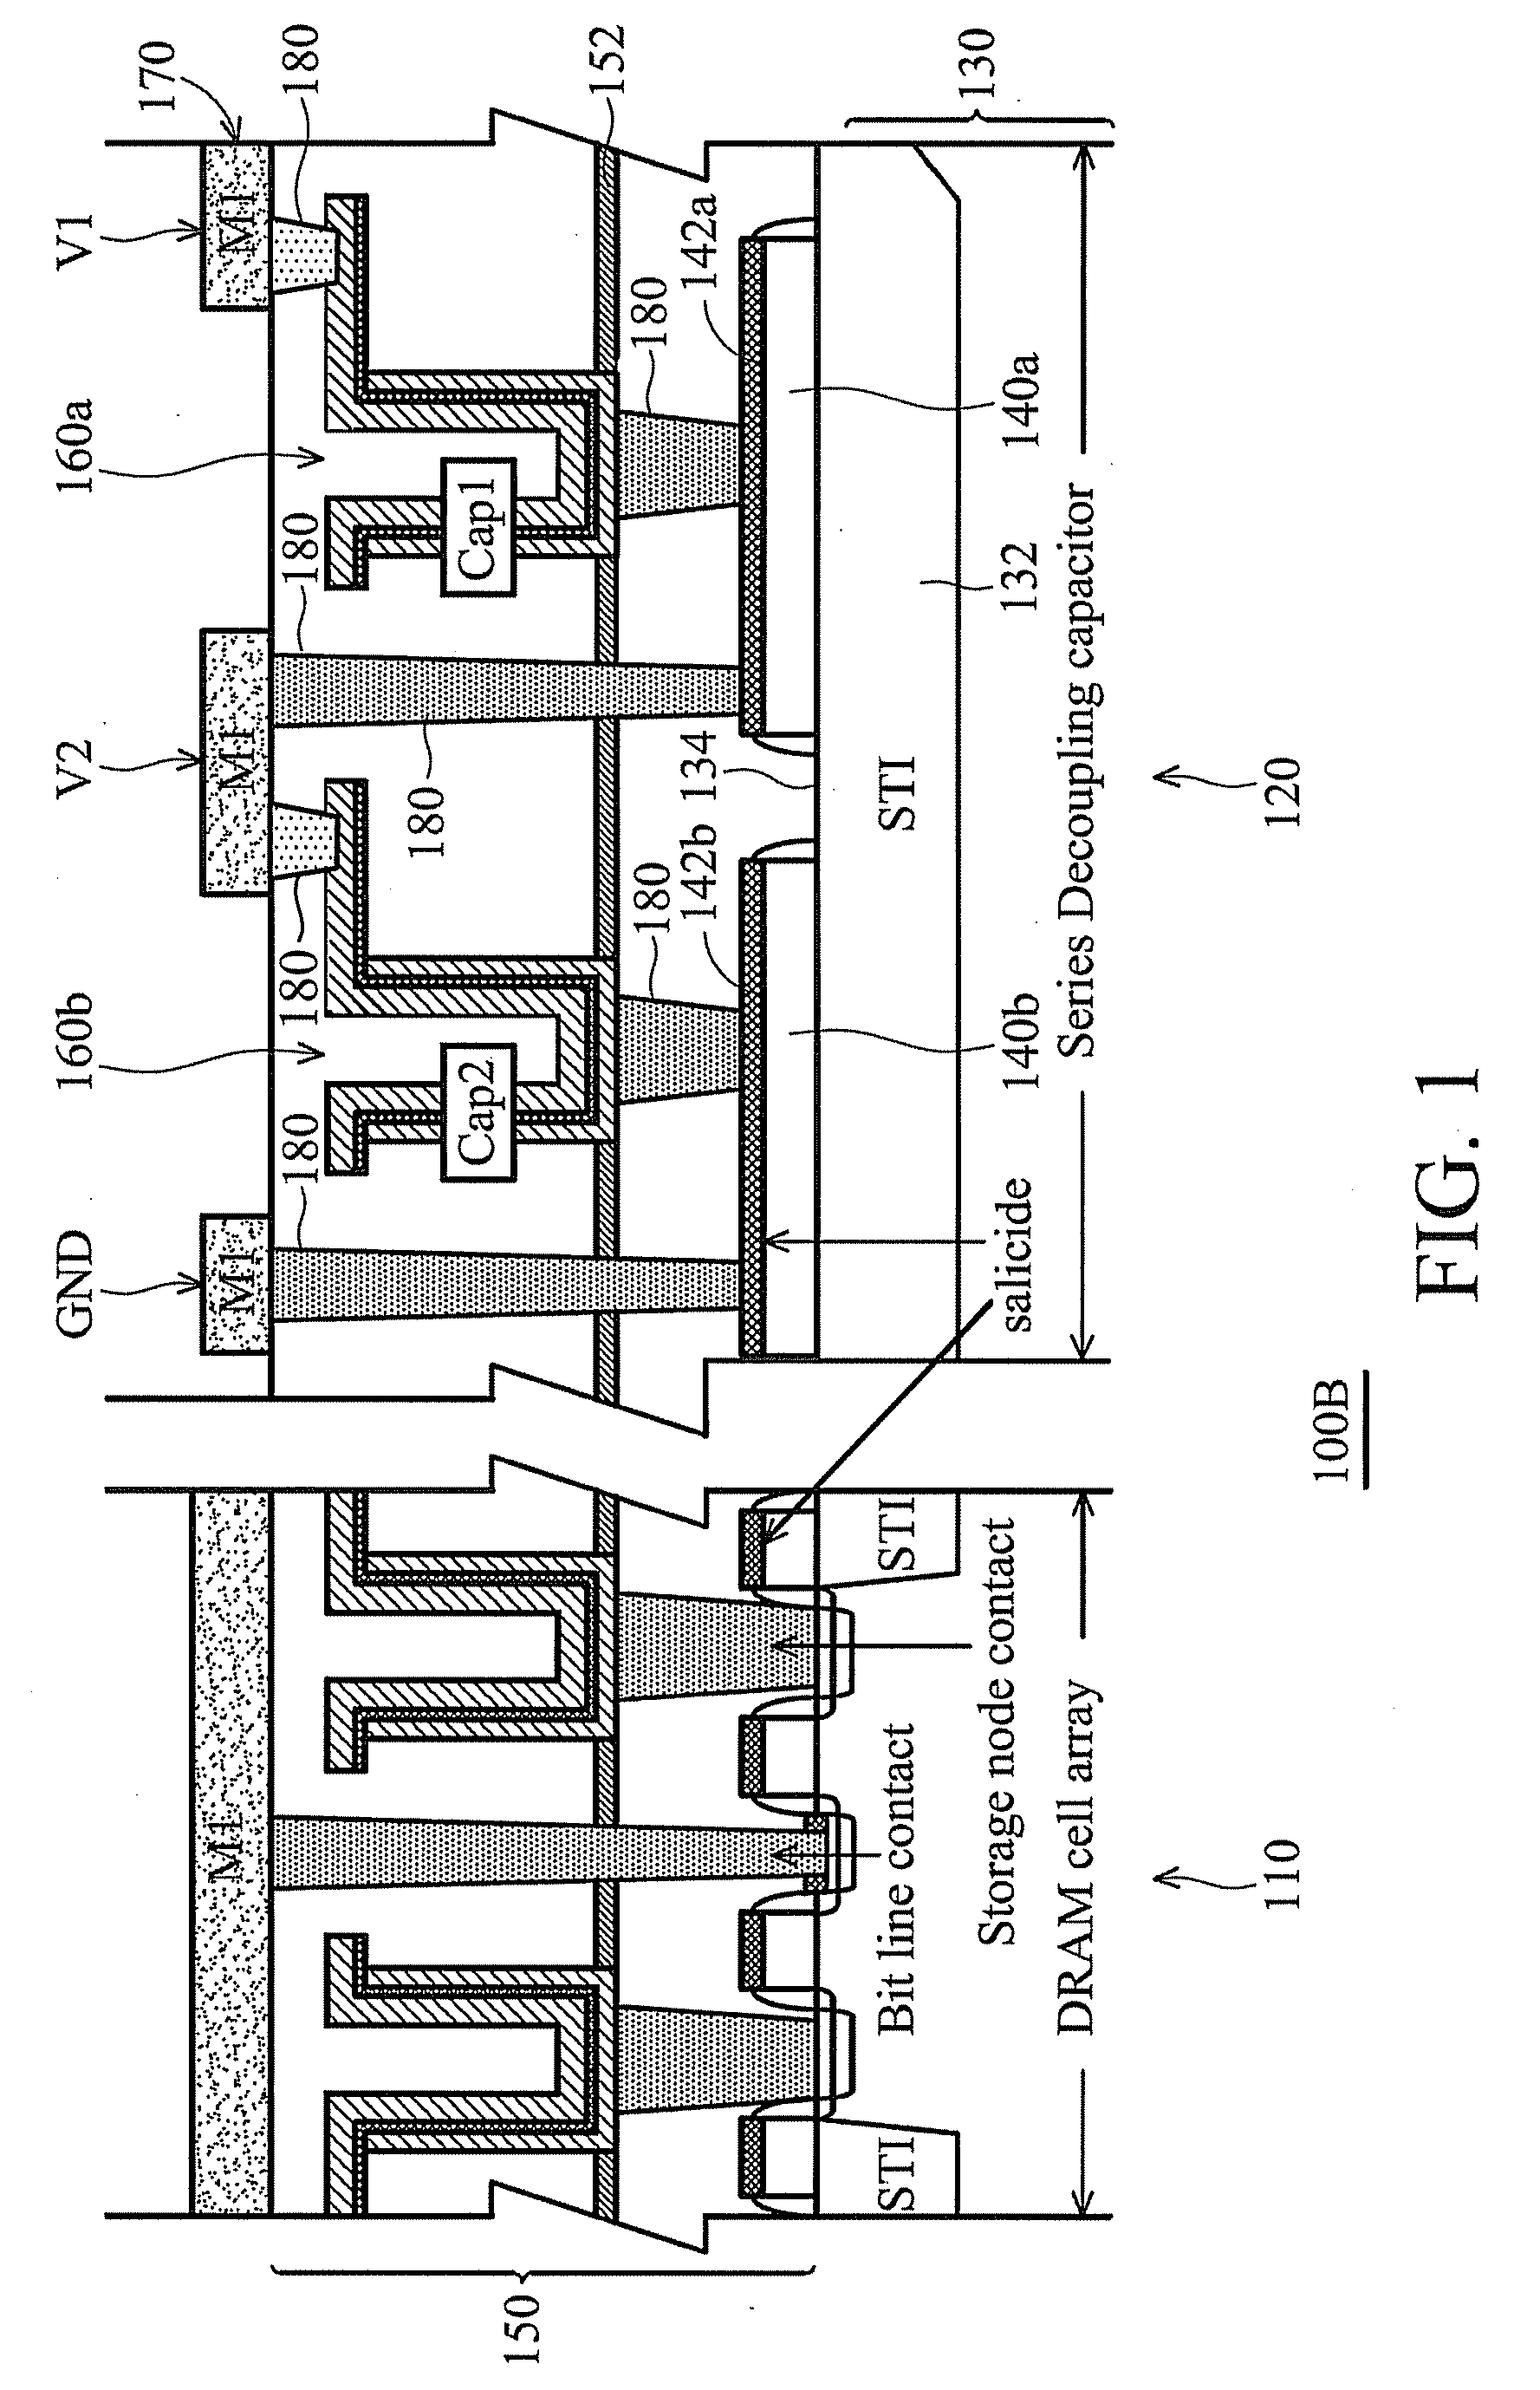 Semiconductor device with decoupling capacitor design